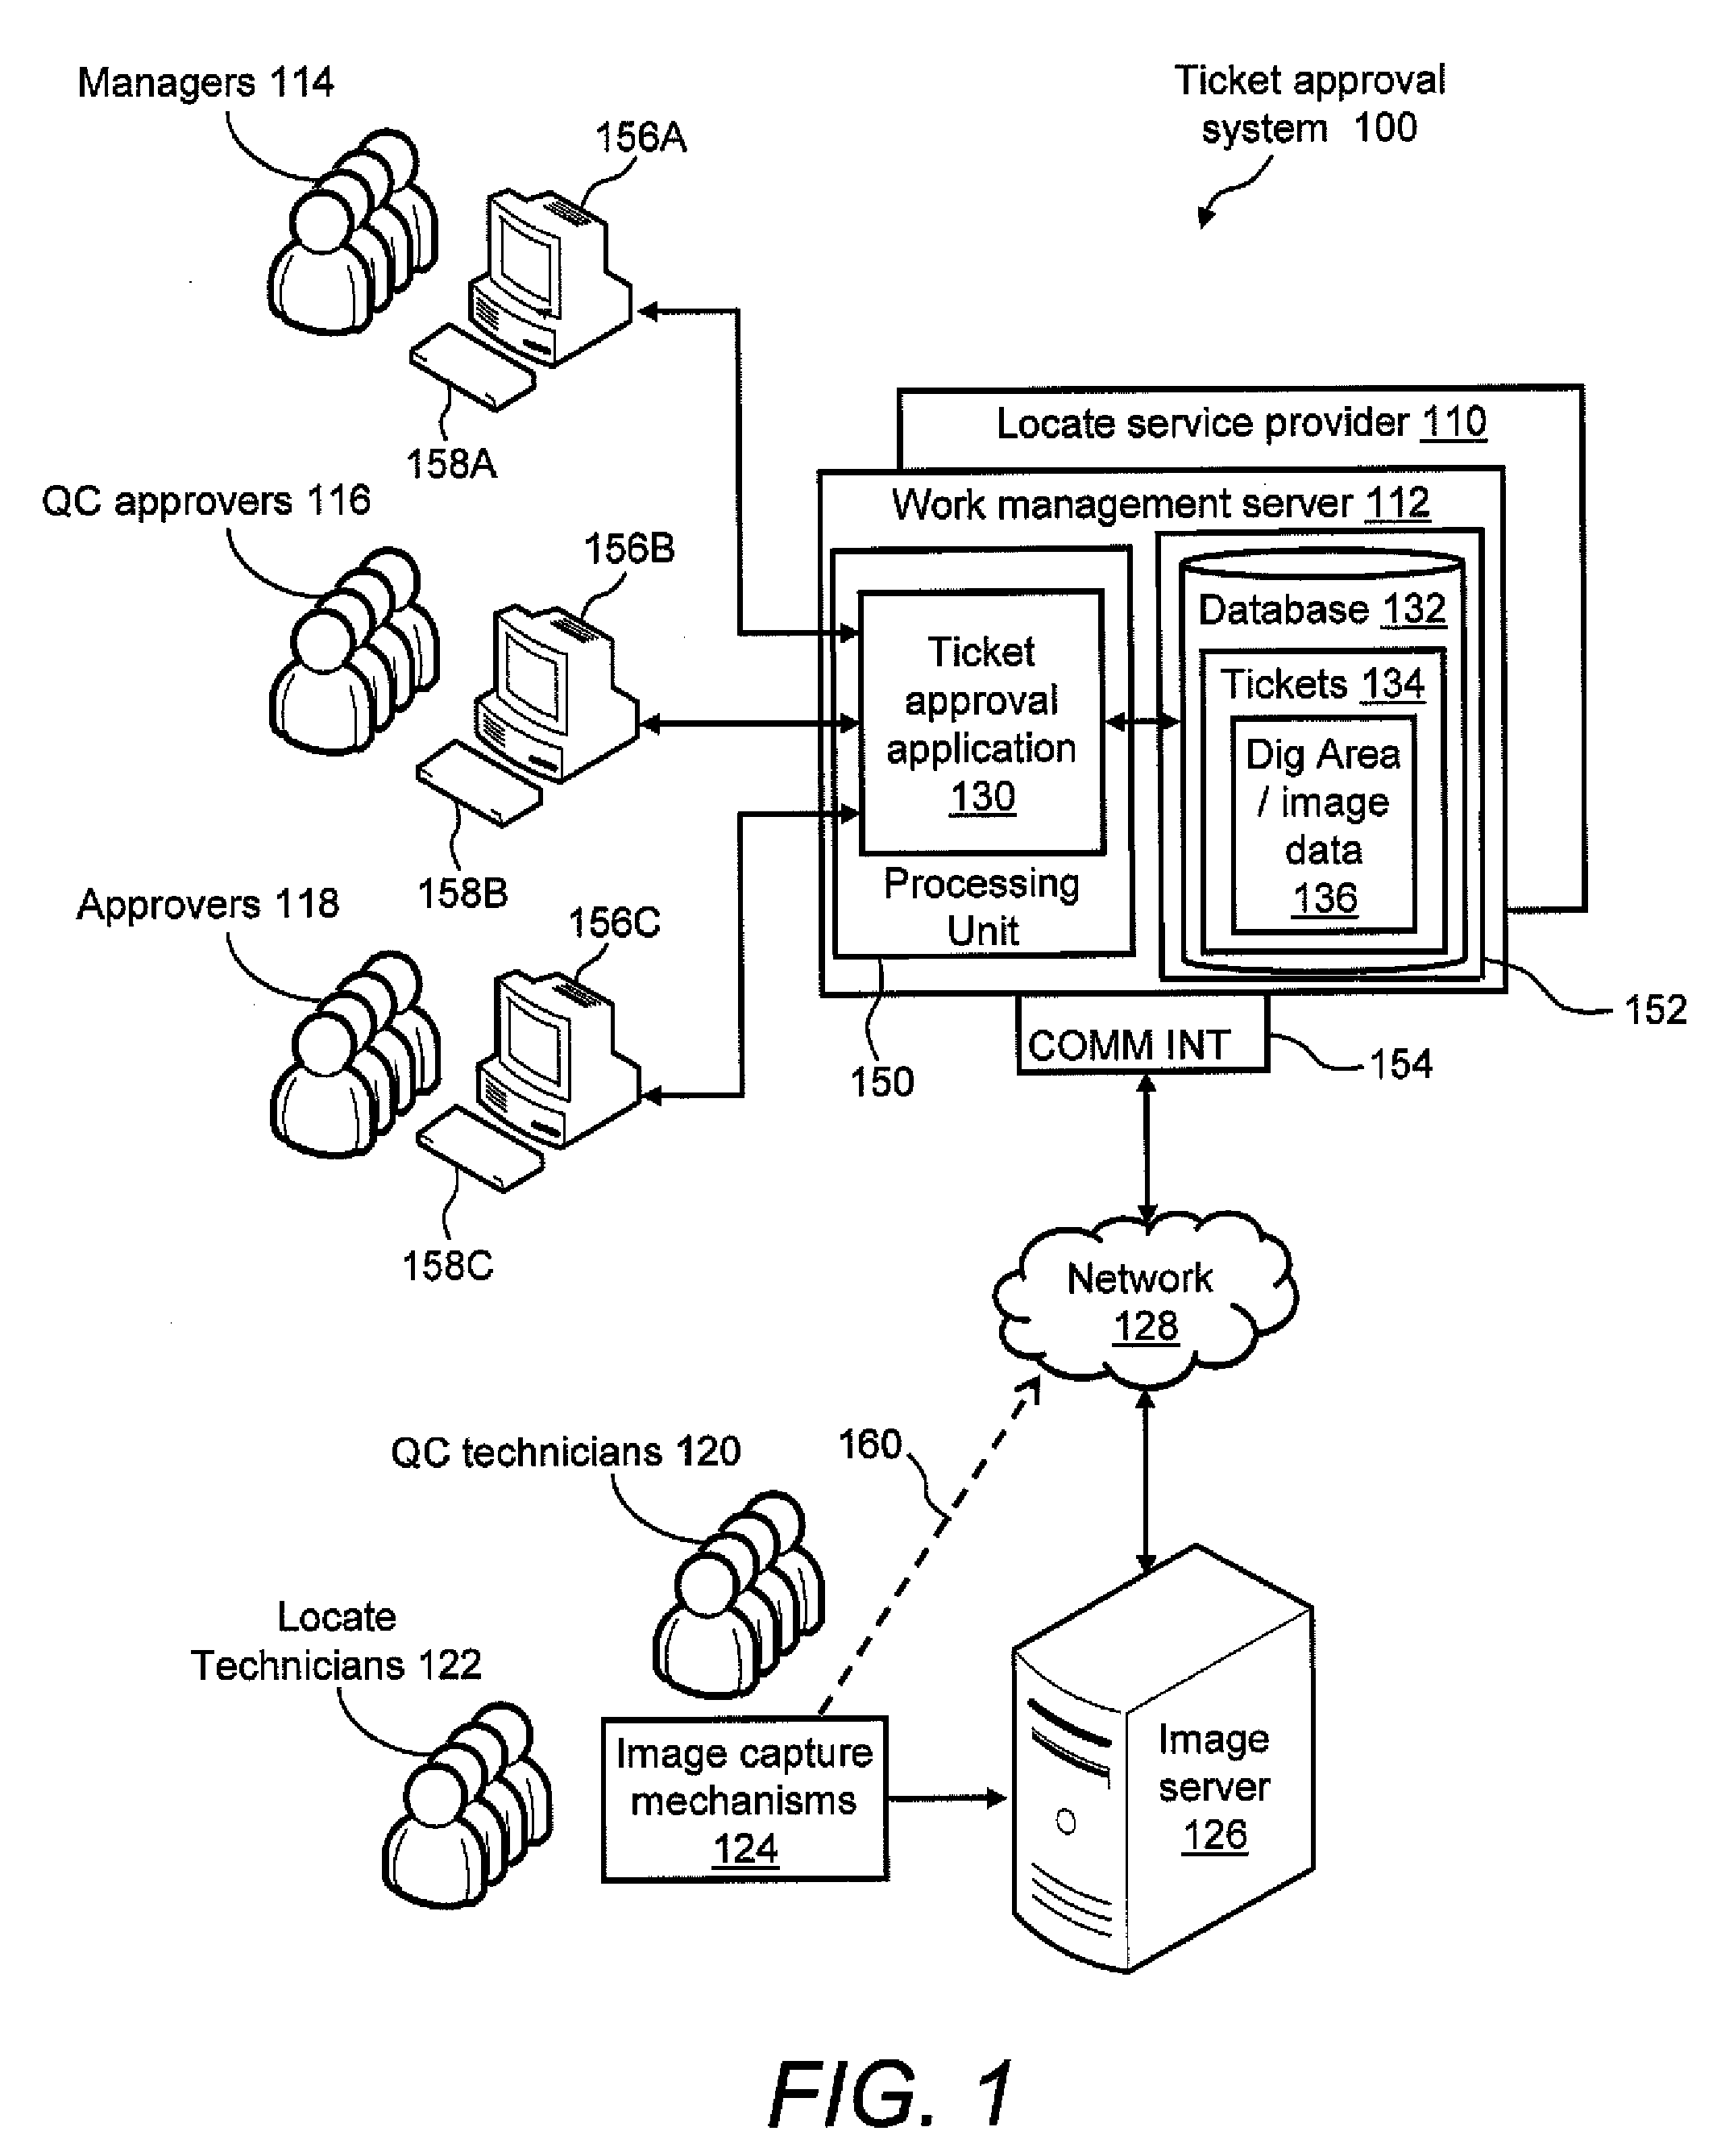 Ticket approval system for and method of performing quality control in field service applications